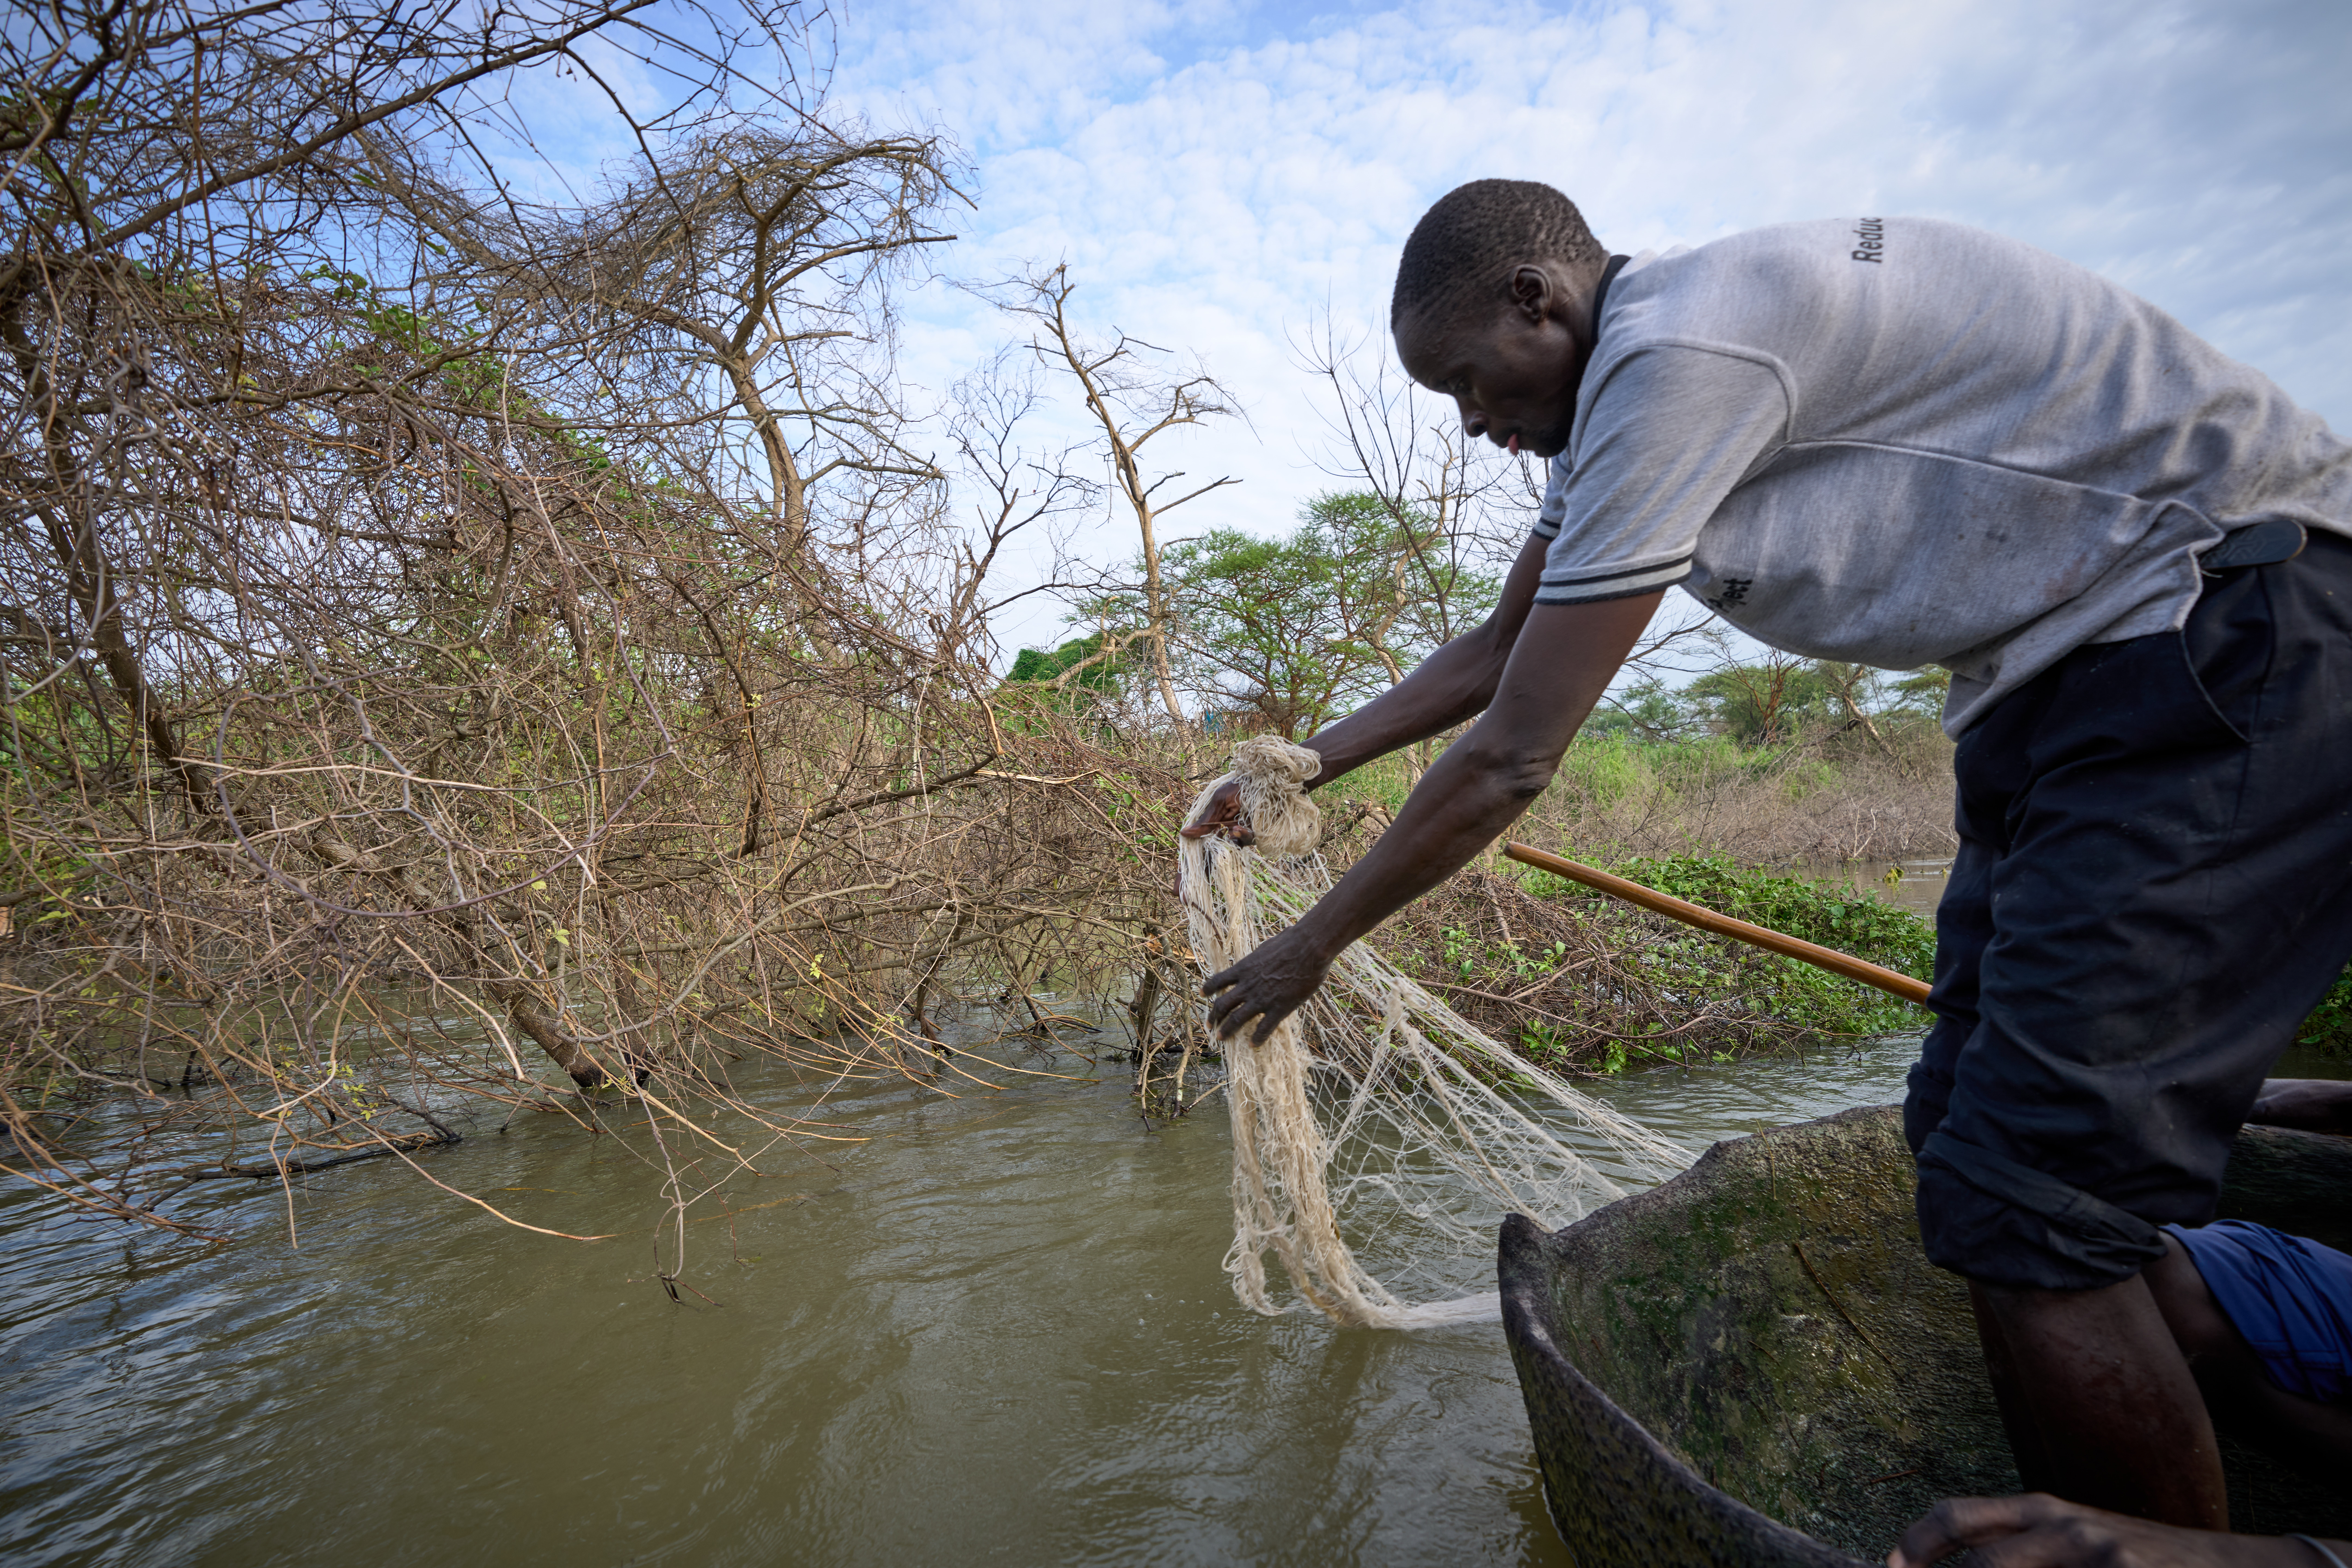 South Sudanese man casts a fishing net into a river as he stands in a canoe